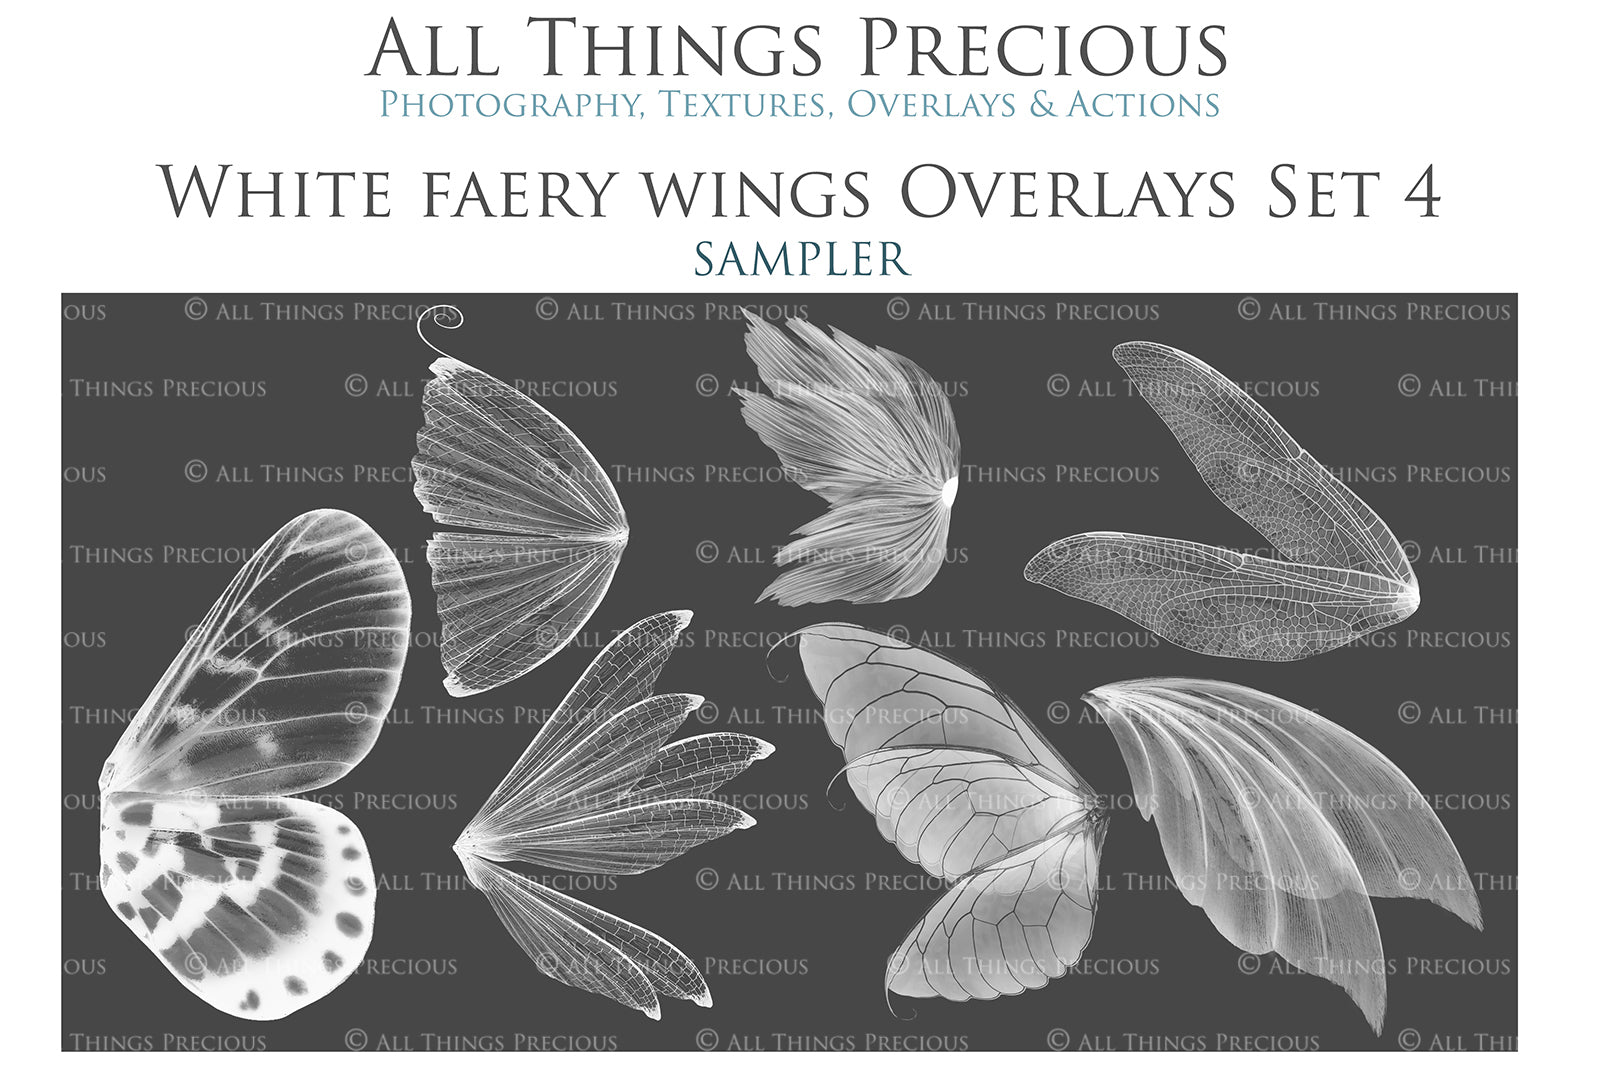 White Sparkling fairy wings, Png overlays for photoshop. High resolution transparent, see through wings. Fairycore, Cosplay, Photographers, Photoshop Edits, Digital overlay for photography. Digital stock and resources. Graphic design. Colourful, Gold, Fantasy Wing Bundle. Assets for Fine Art design. By ATP Textures